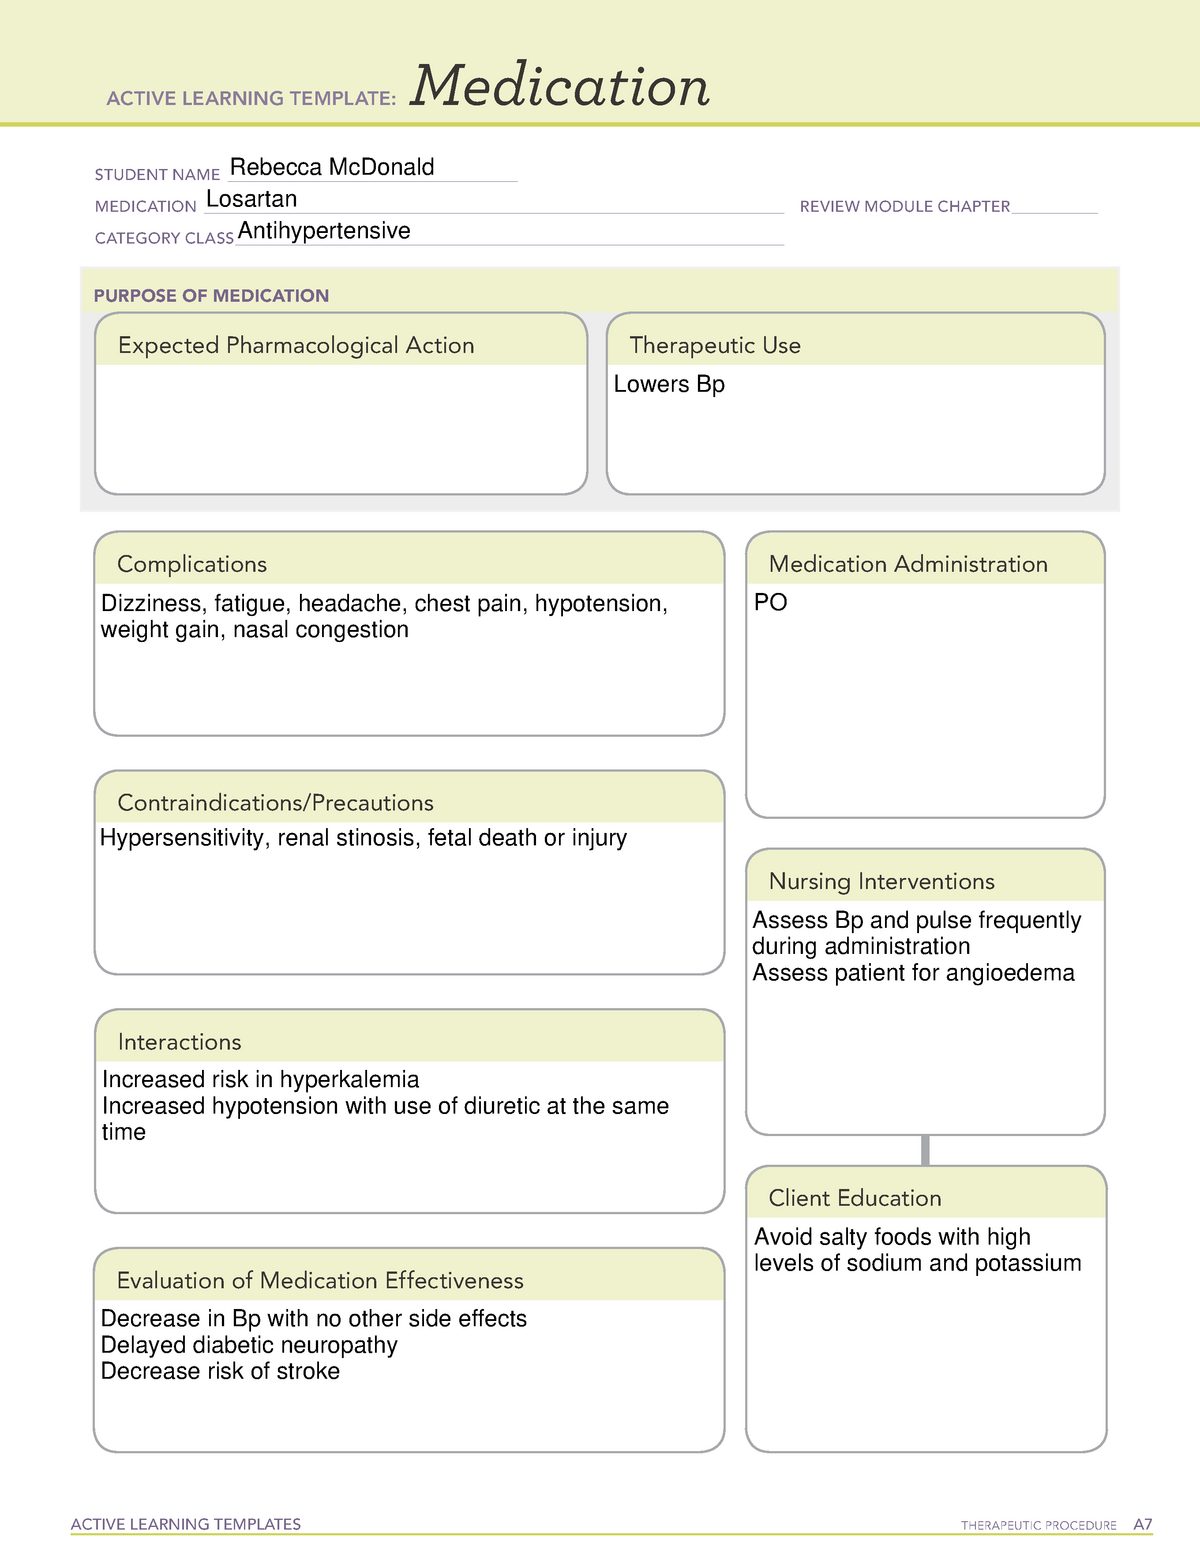 losartan-med-card-template-active-learning-templates-therapeutic